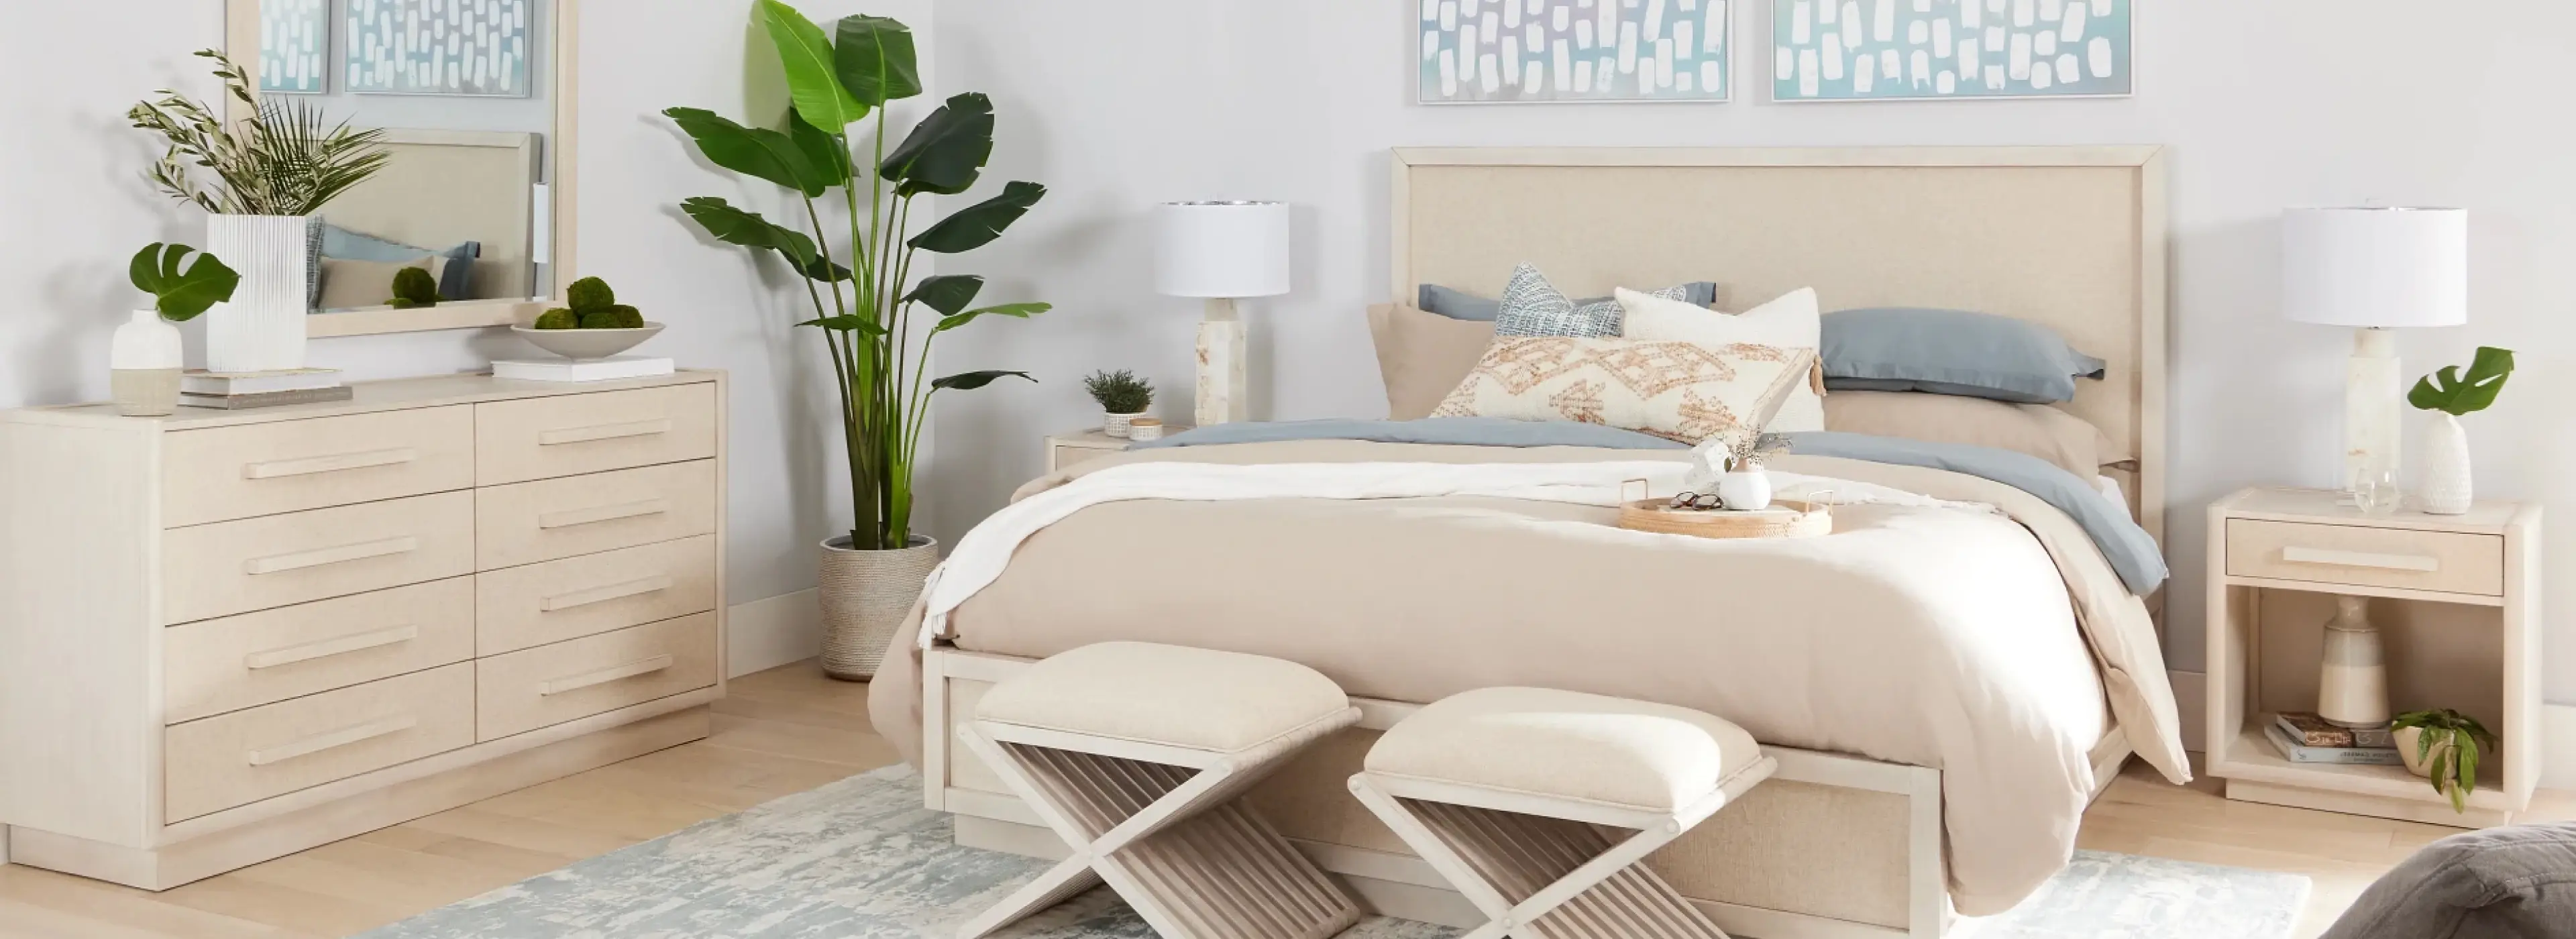 5 Ways to Get Your Bed Ready for Fall